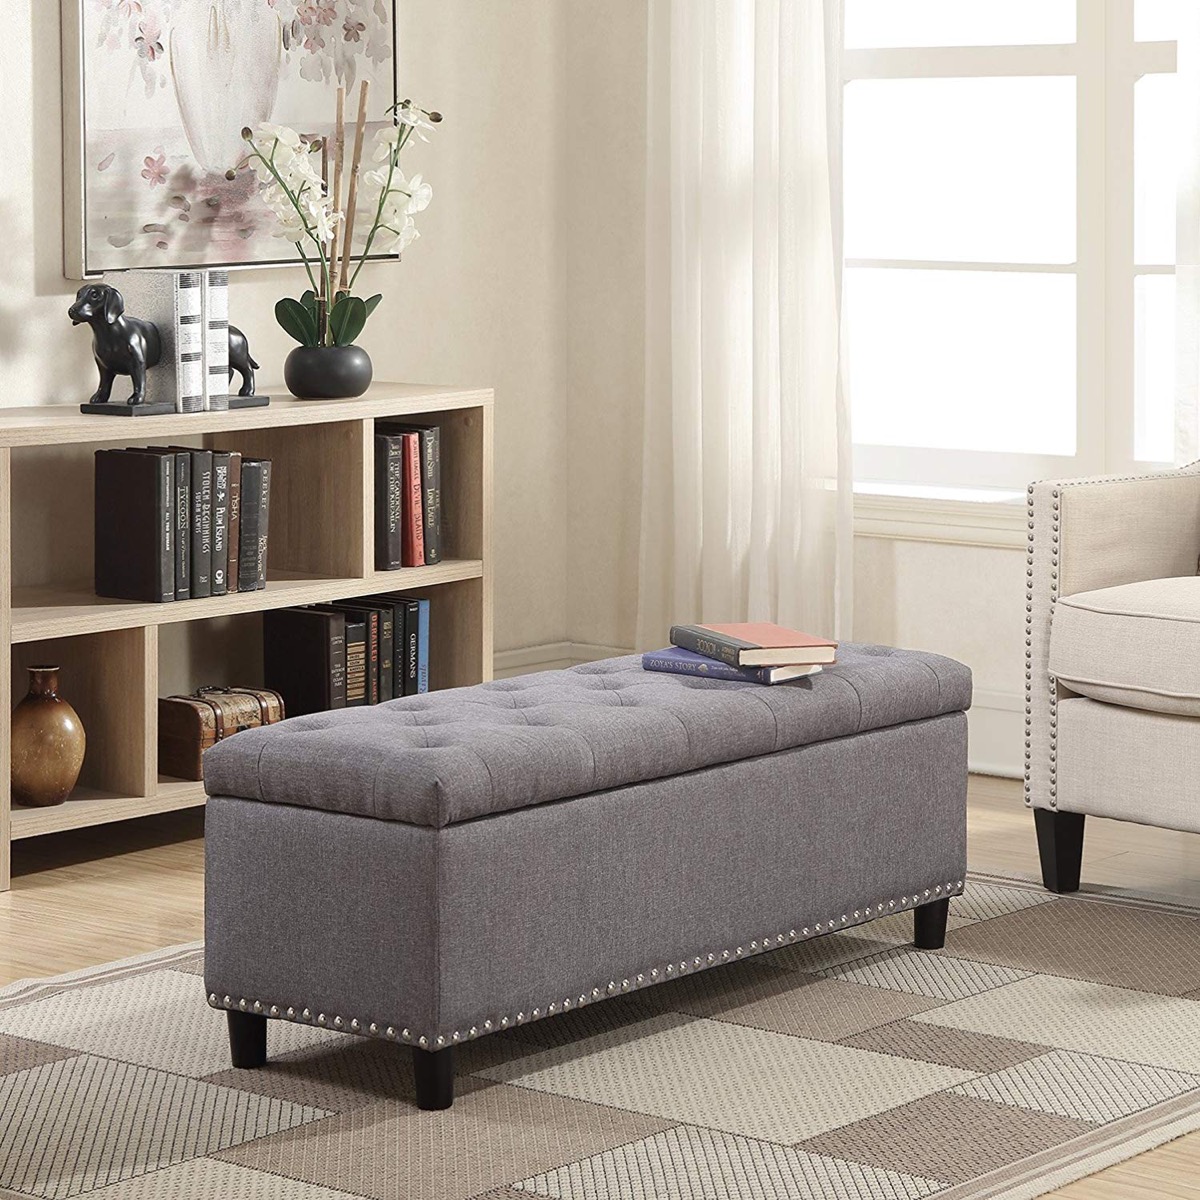 51 Storage Benches To Streamline Your, Furniture Benches Living Room